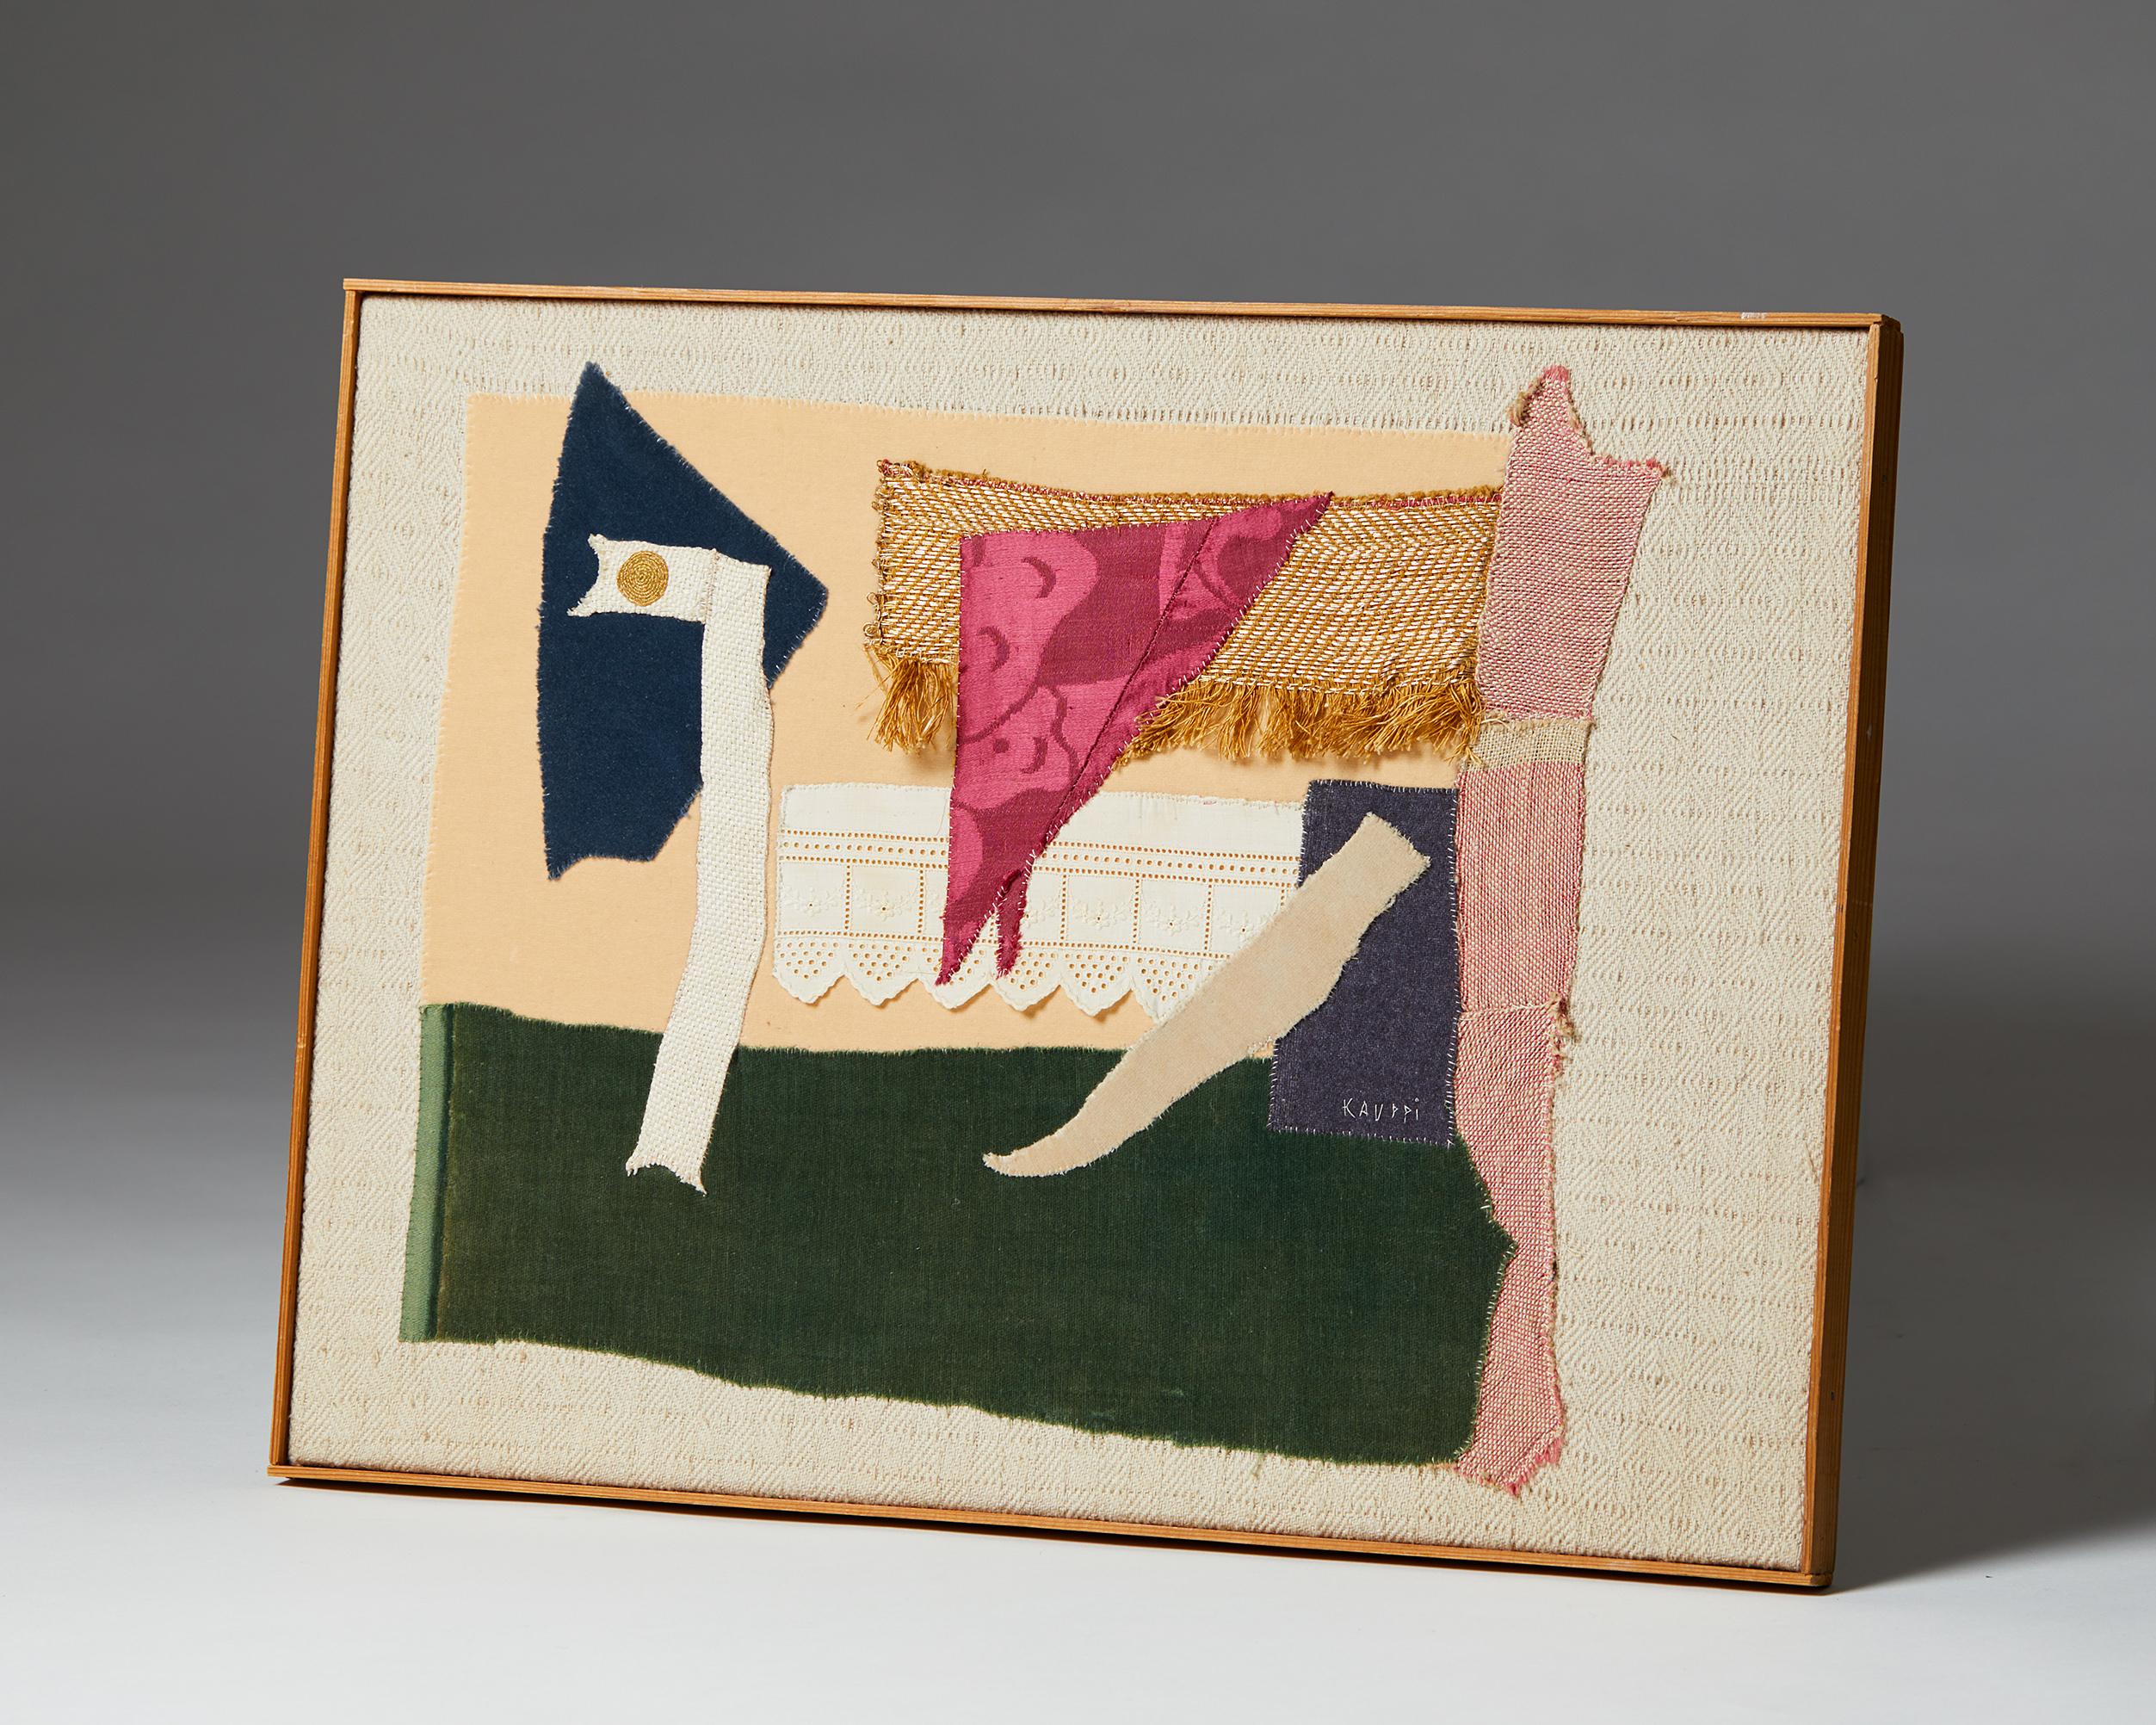 Tapestry/ Collage by Sten Kauppi,
Sweden. 1970's.

Kelim technique. Wool and cotton.

Signed Kauppi.

Dimensions:
H: 42.2 cm/ 16 5/8